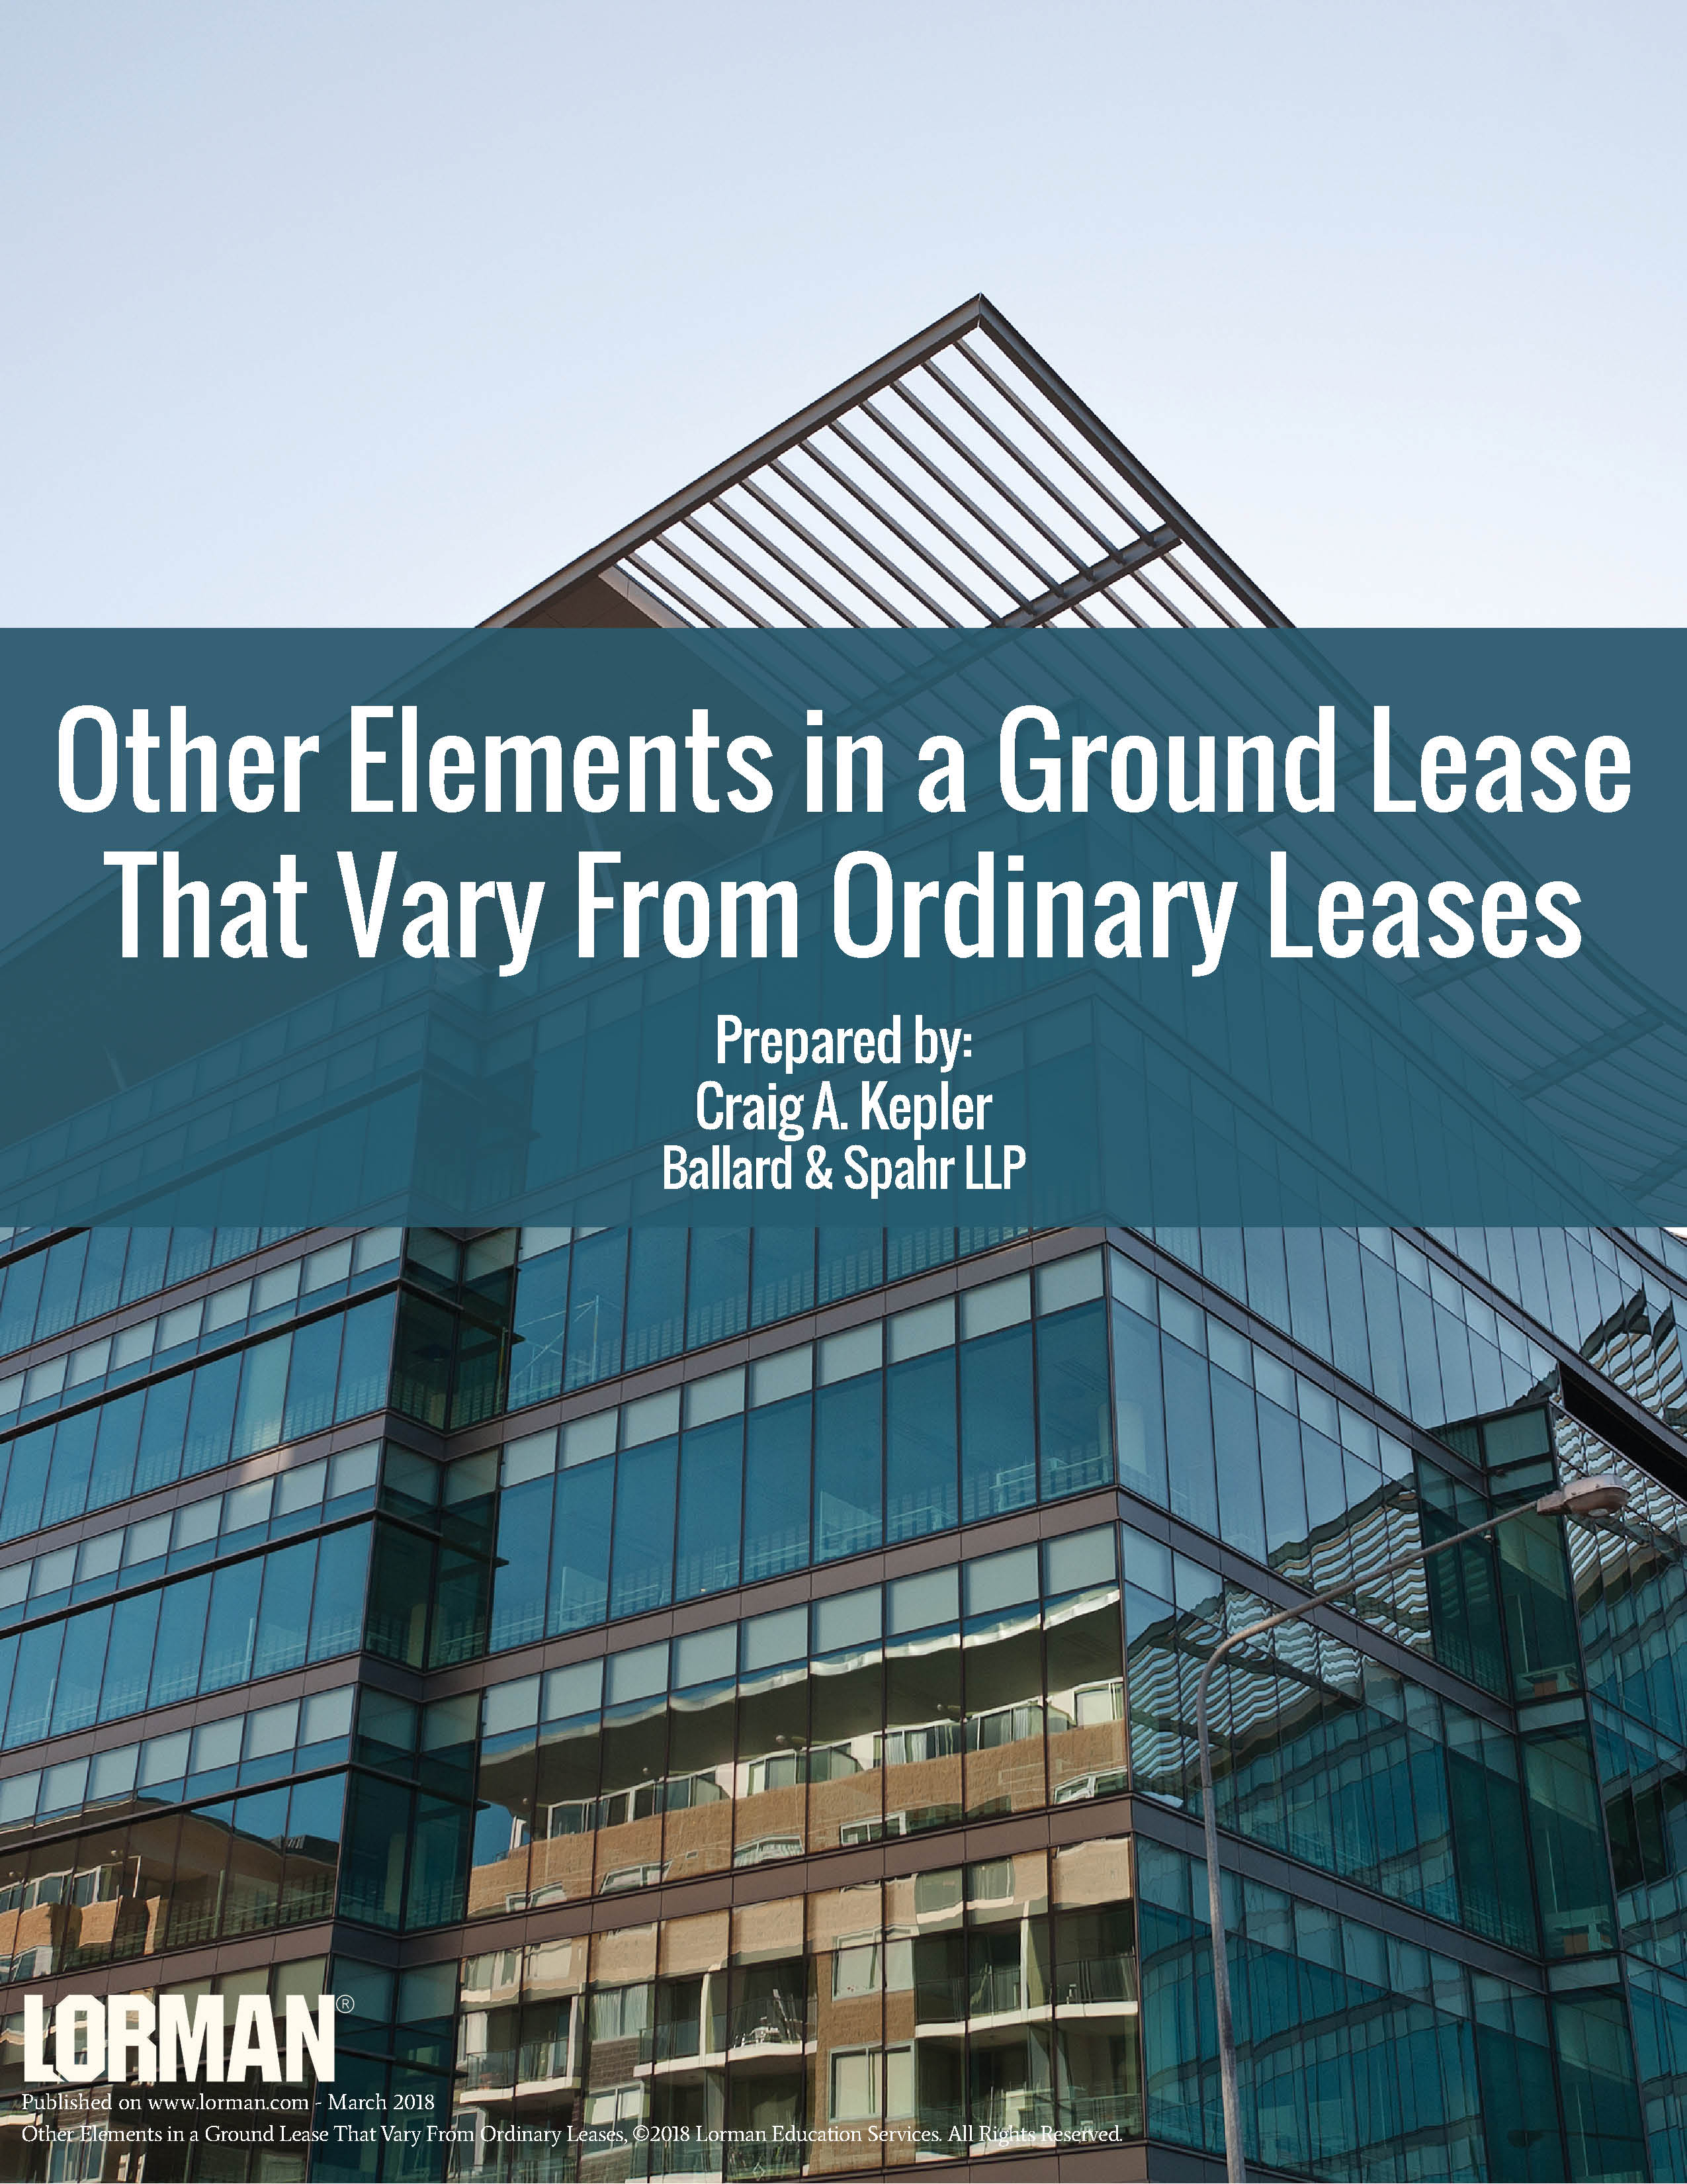 Other Elements in a Ground Lease That Vary From Ordinary Leases